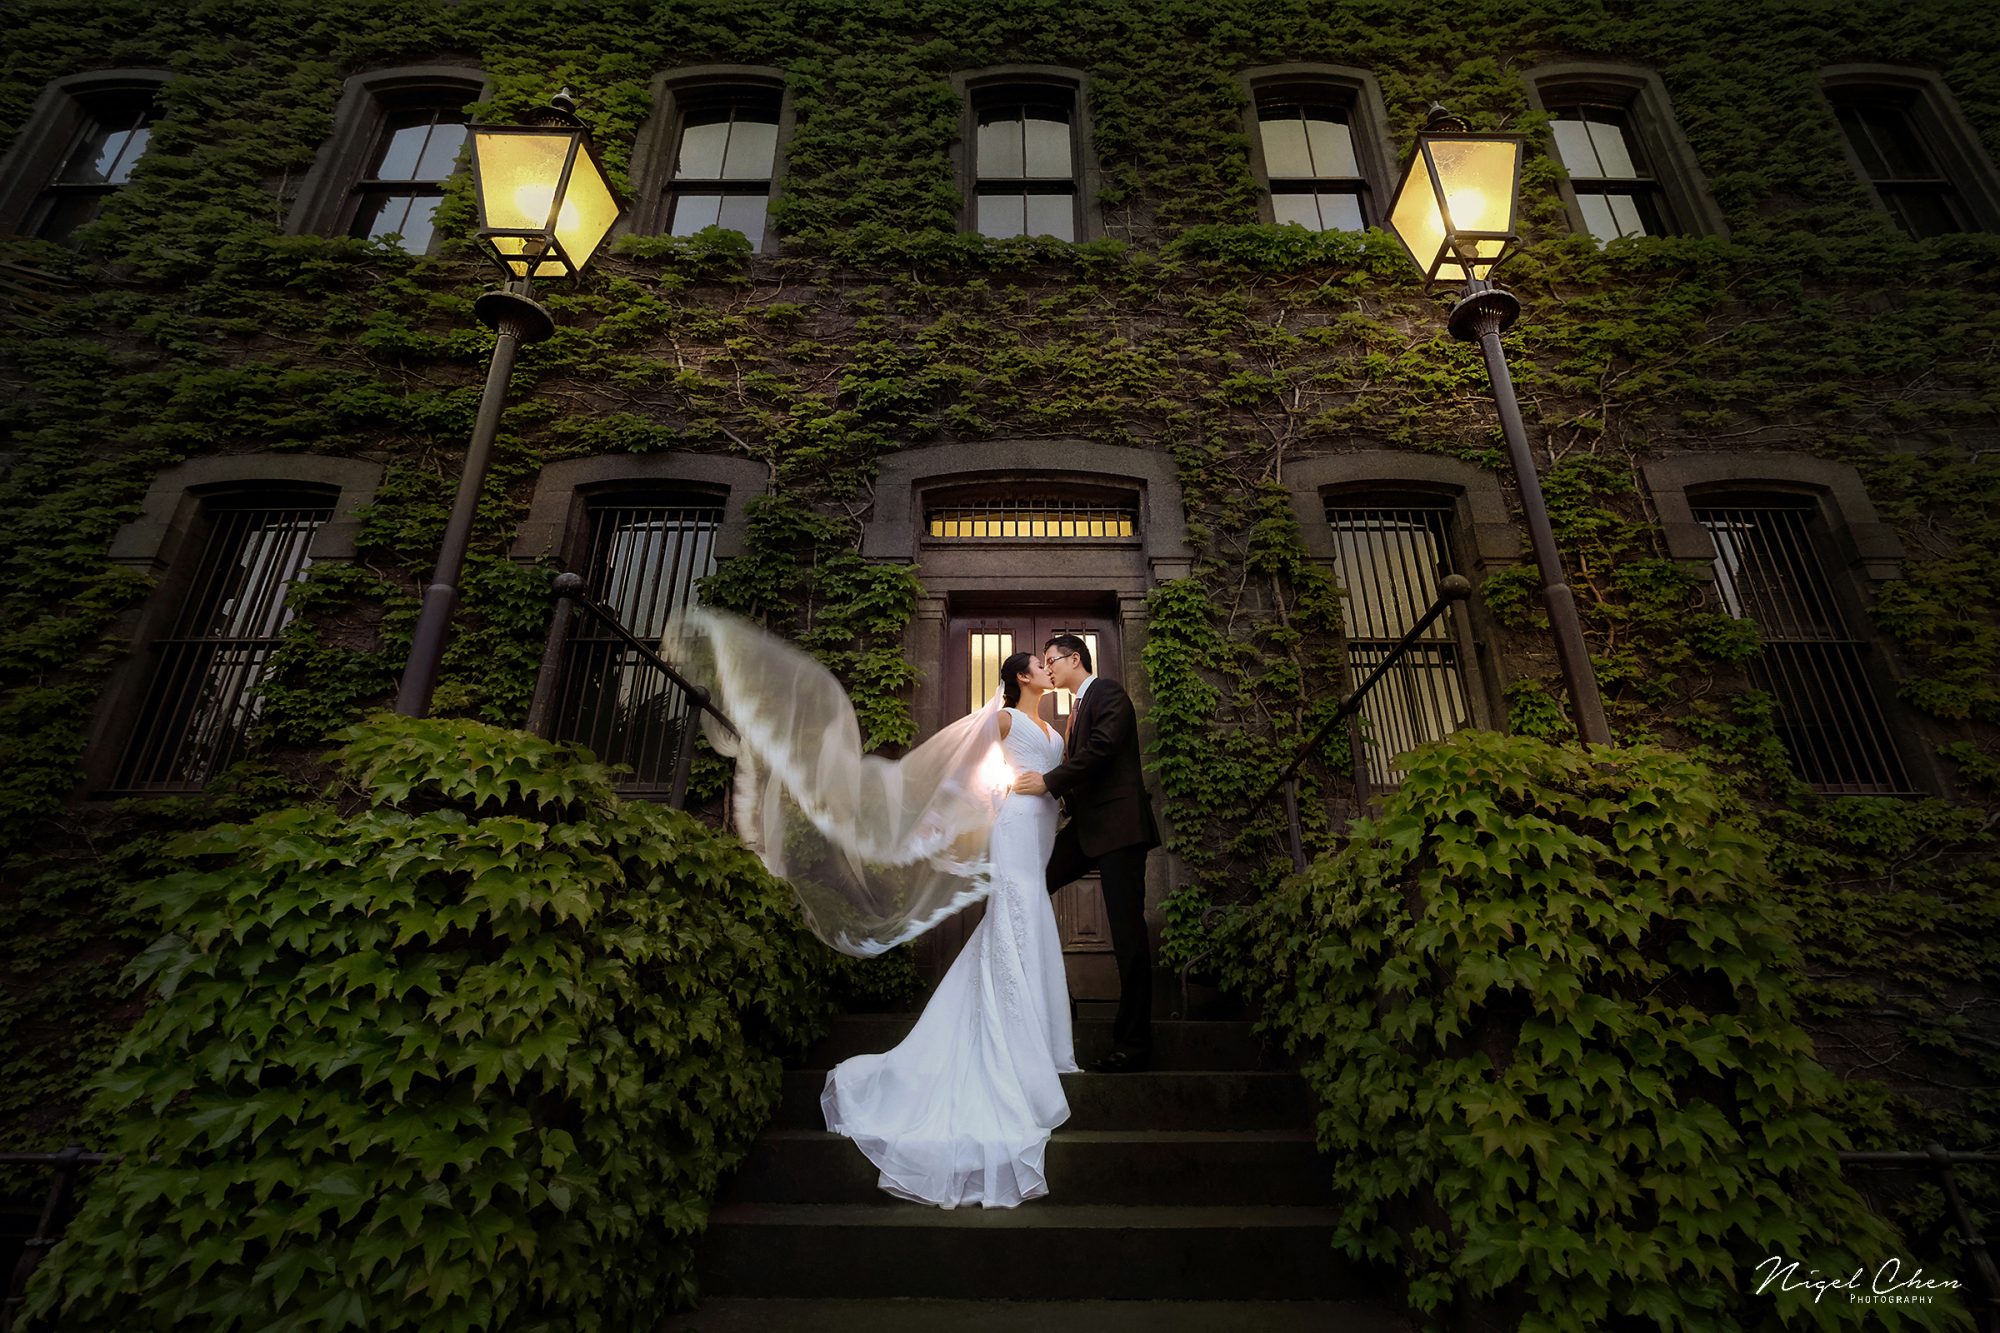 Pre-wedding photography by Nigel Chen Photography.